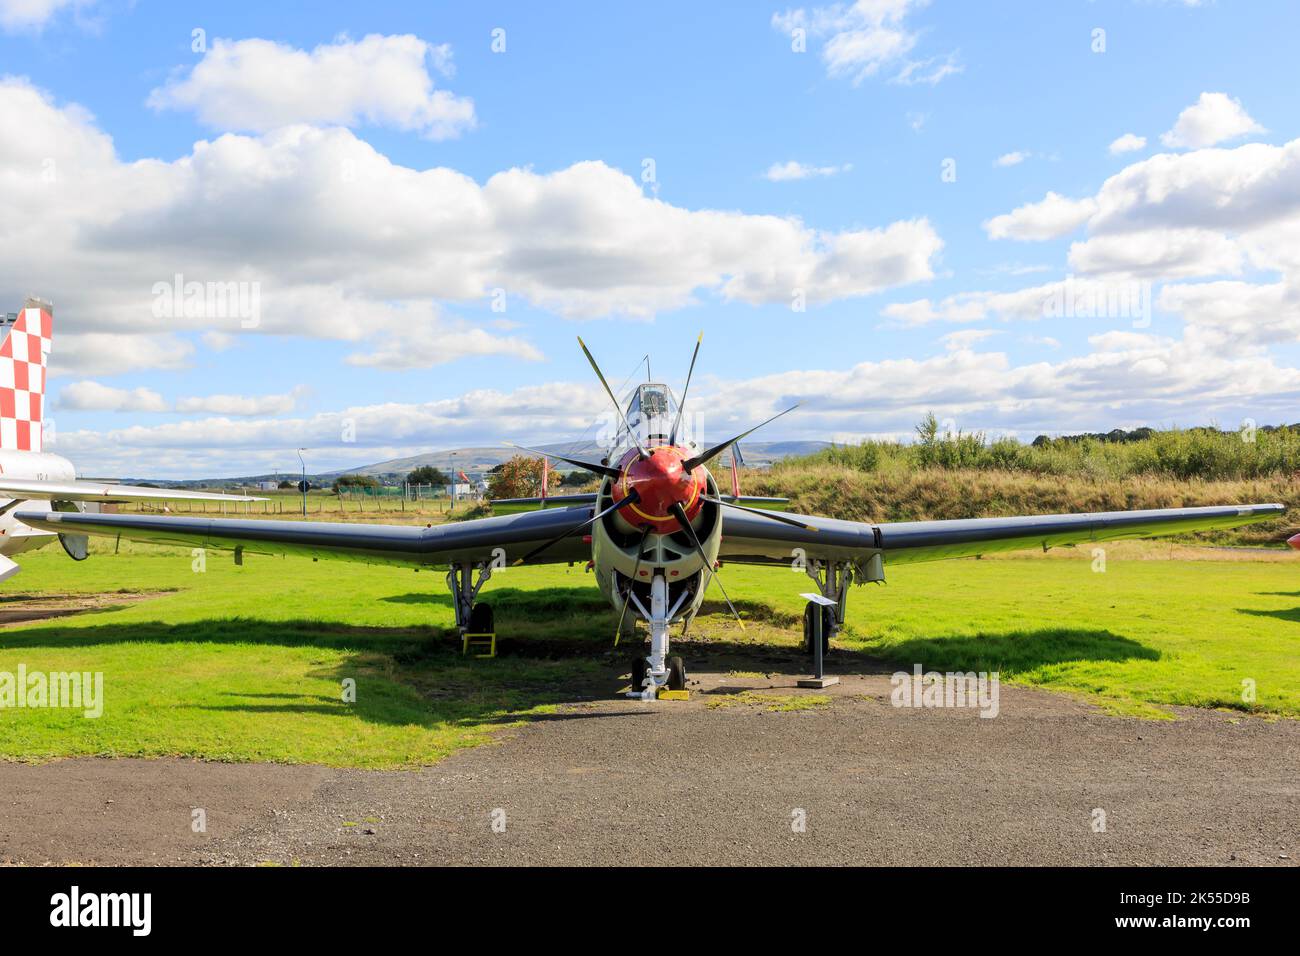 Carlisle, England, September 16, 2022 :  front view of the twin propellors and wings of an old Fairey Gannet plane on display at the Solway aviation m Stock Photo